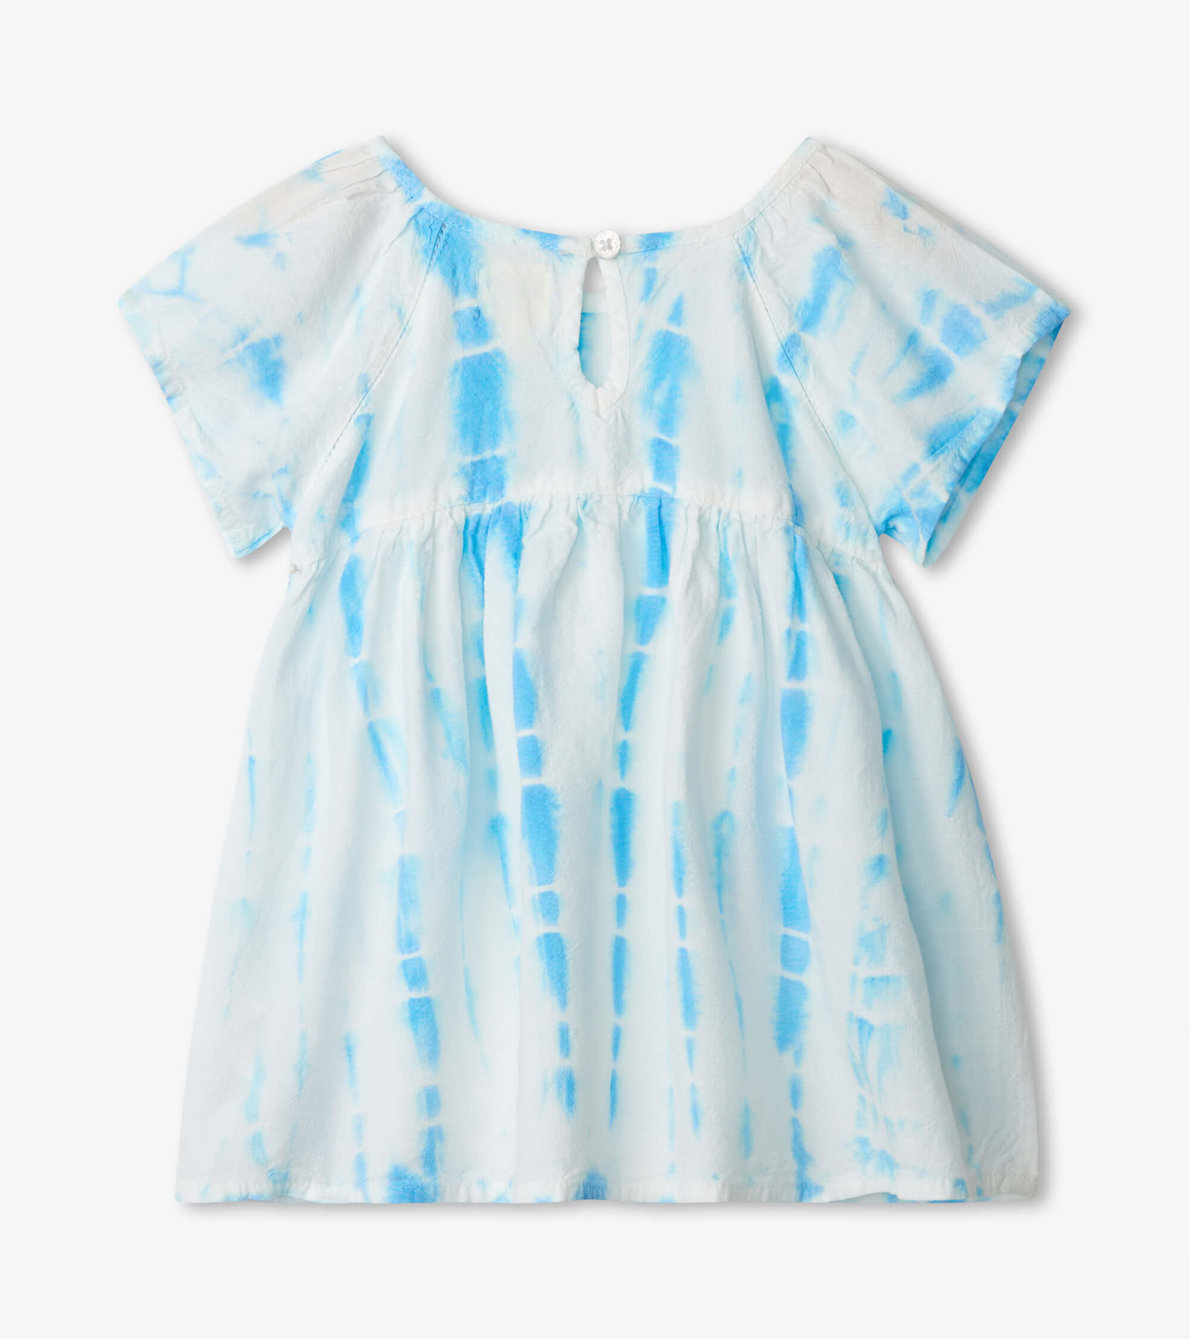 View larger image of Blue Tie Dye Stripes Baby Woven Dress